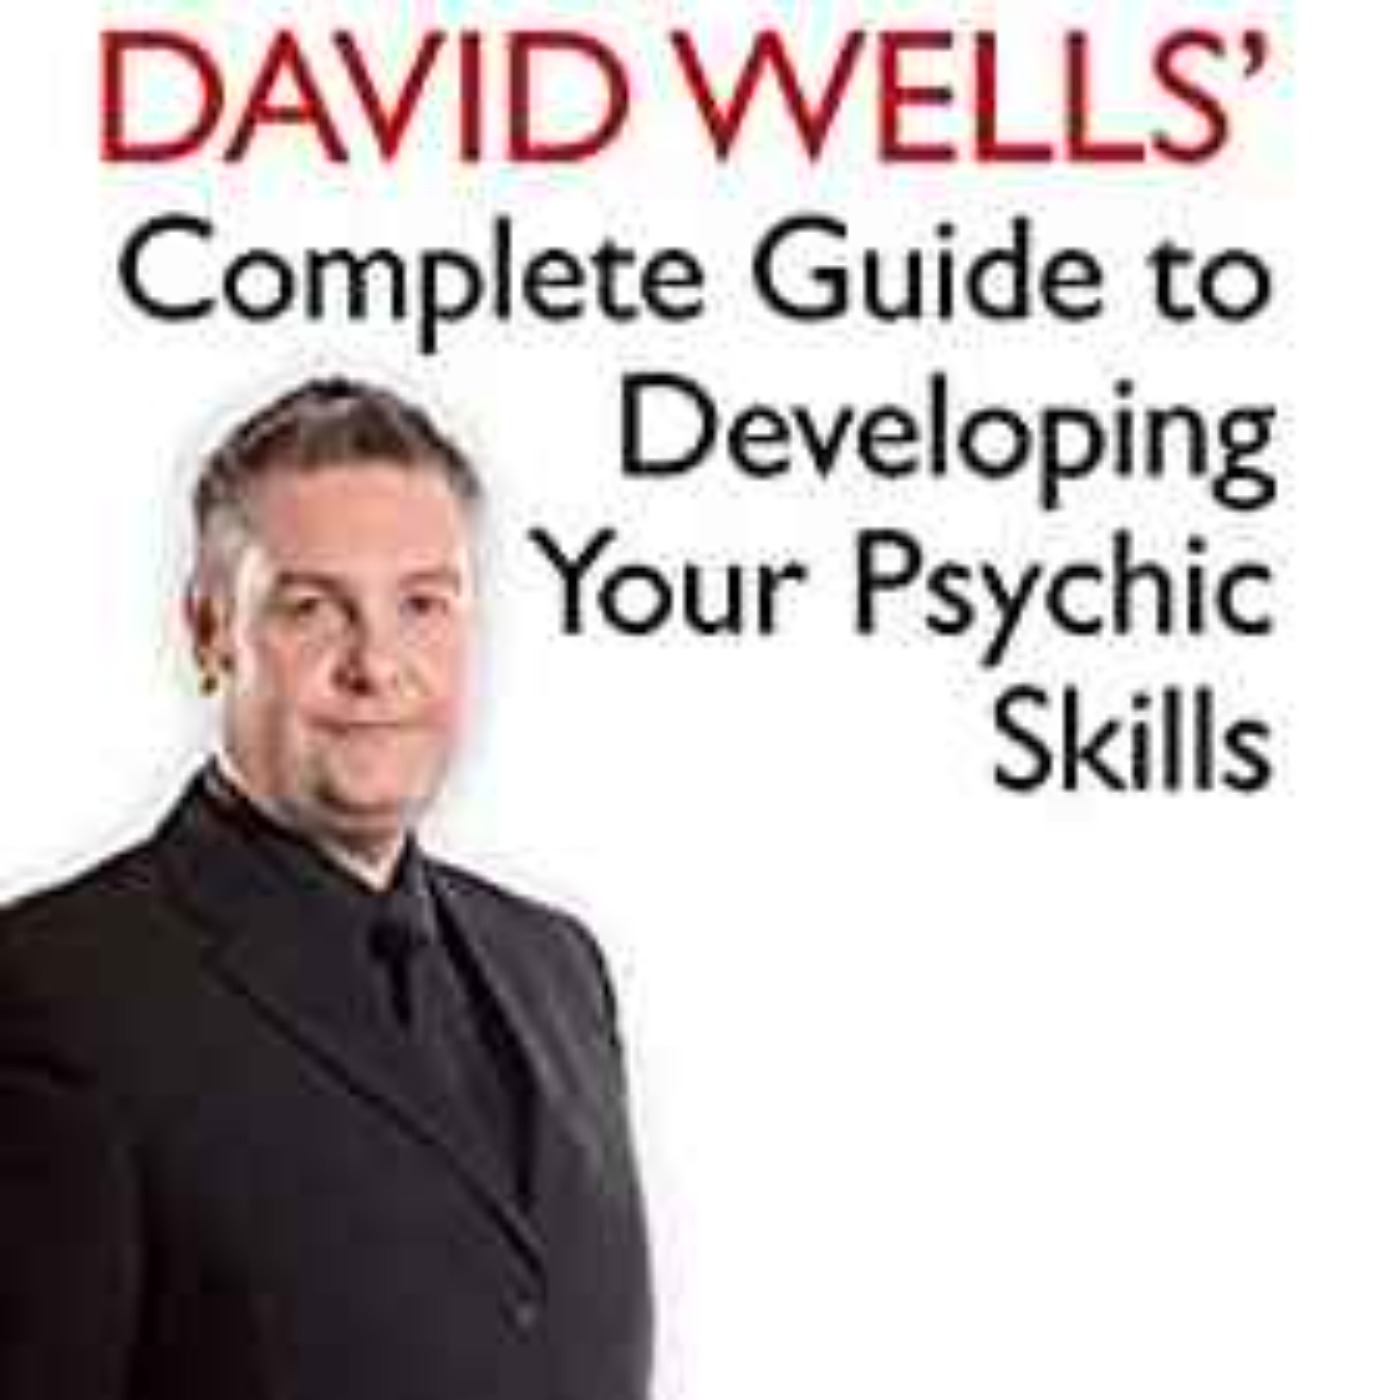 David Wells - David Wells' Complete Guide To Developing Your Psychic Skills